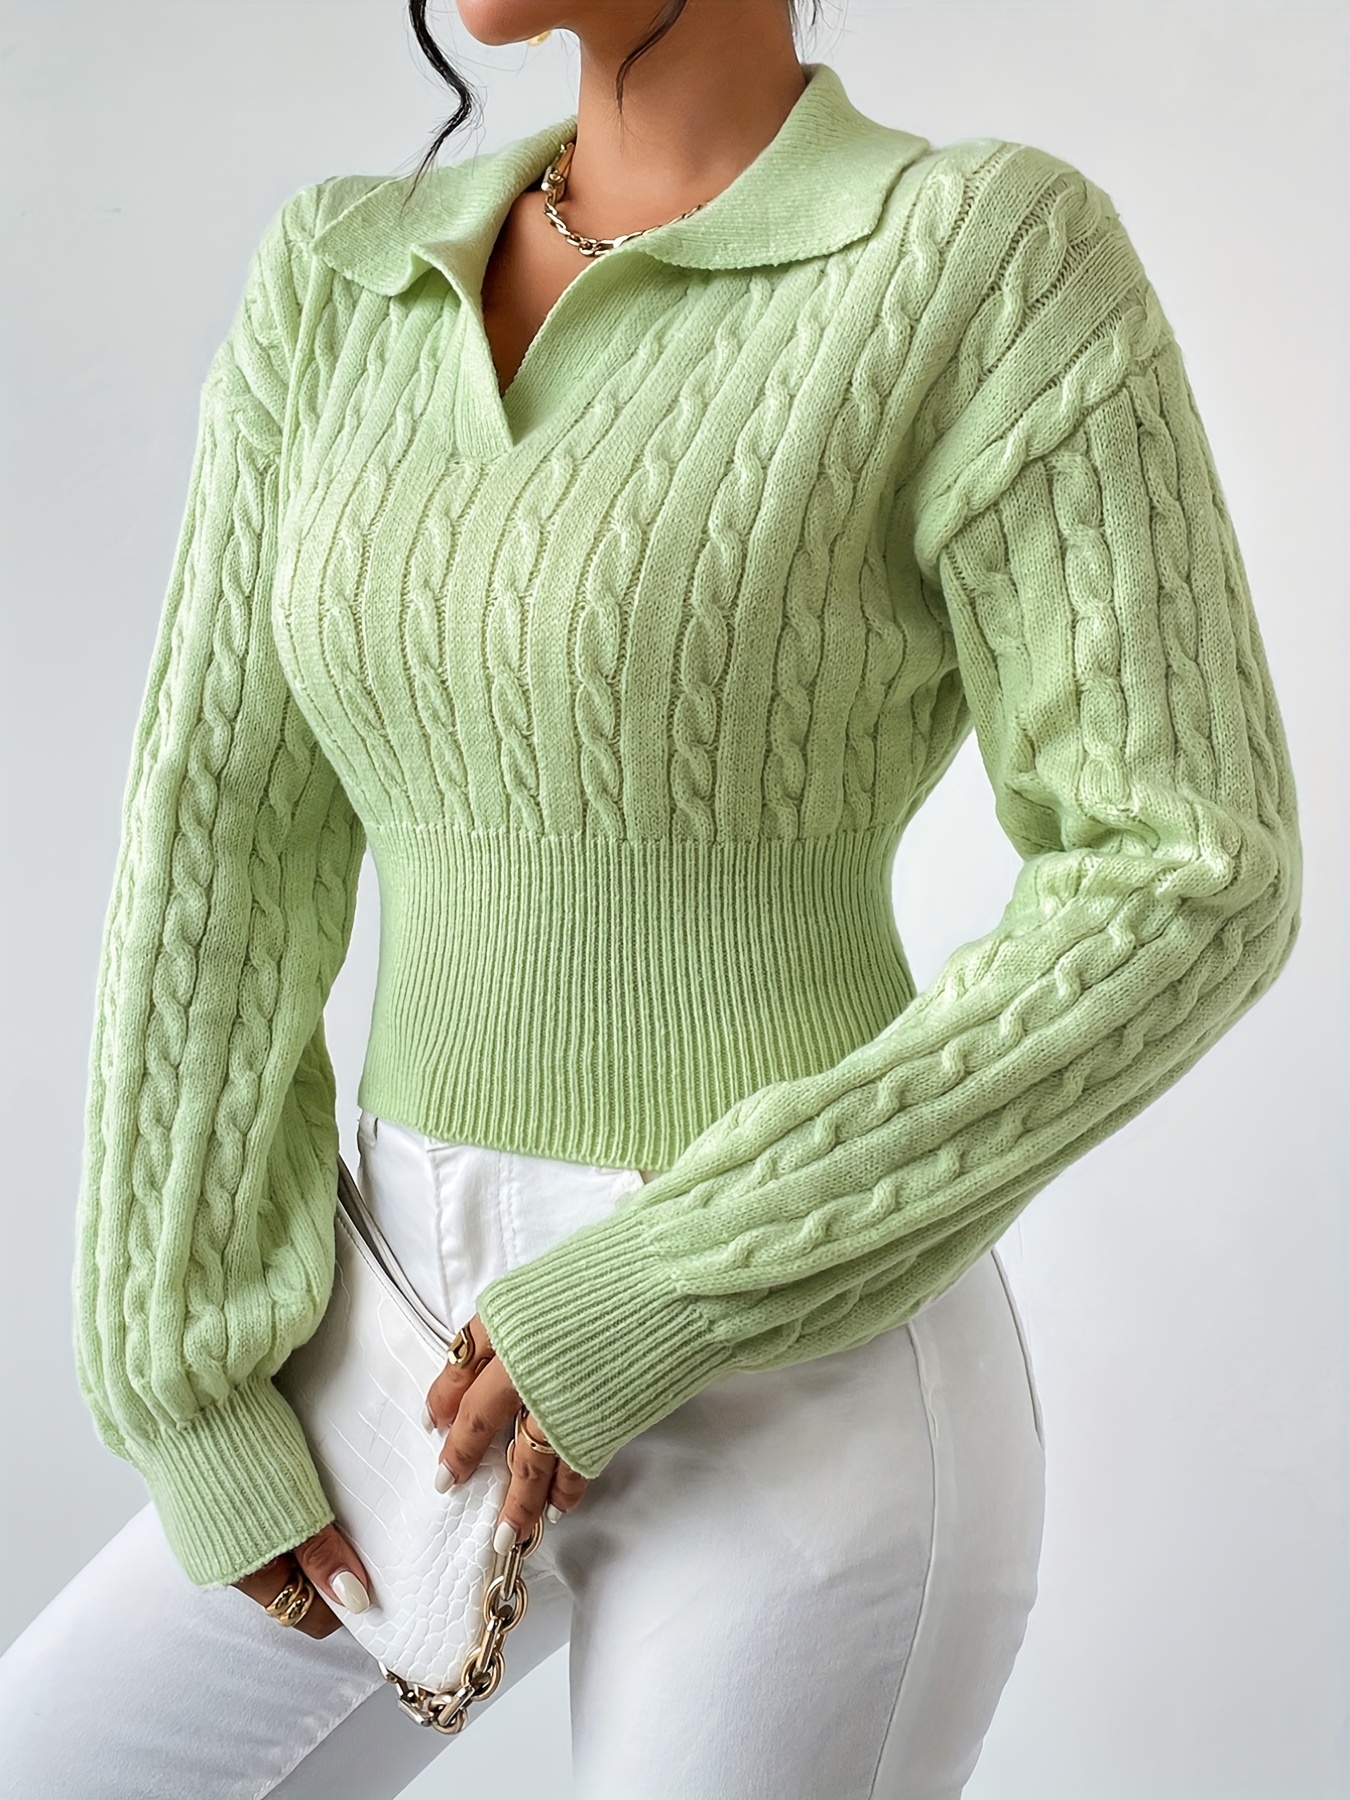 The Dark Green Lapel Ribbed Textured Knit Top